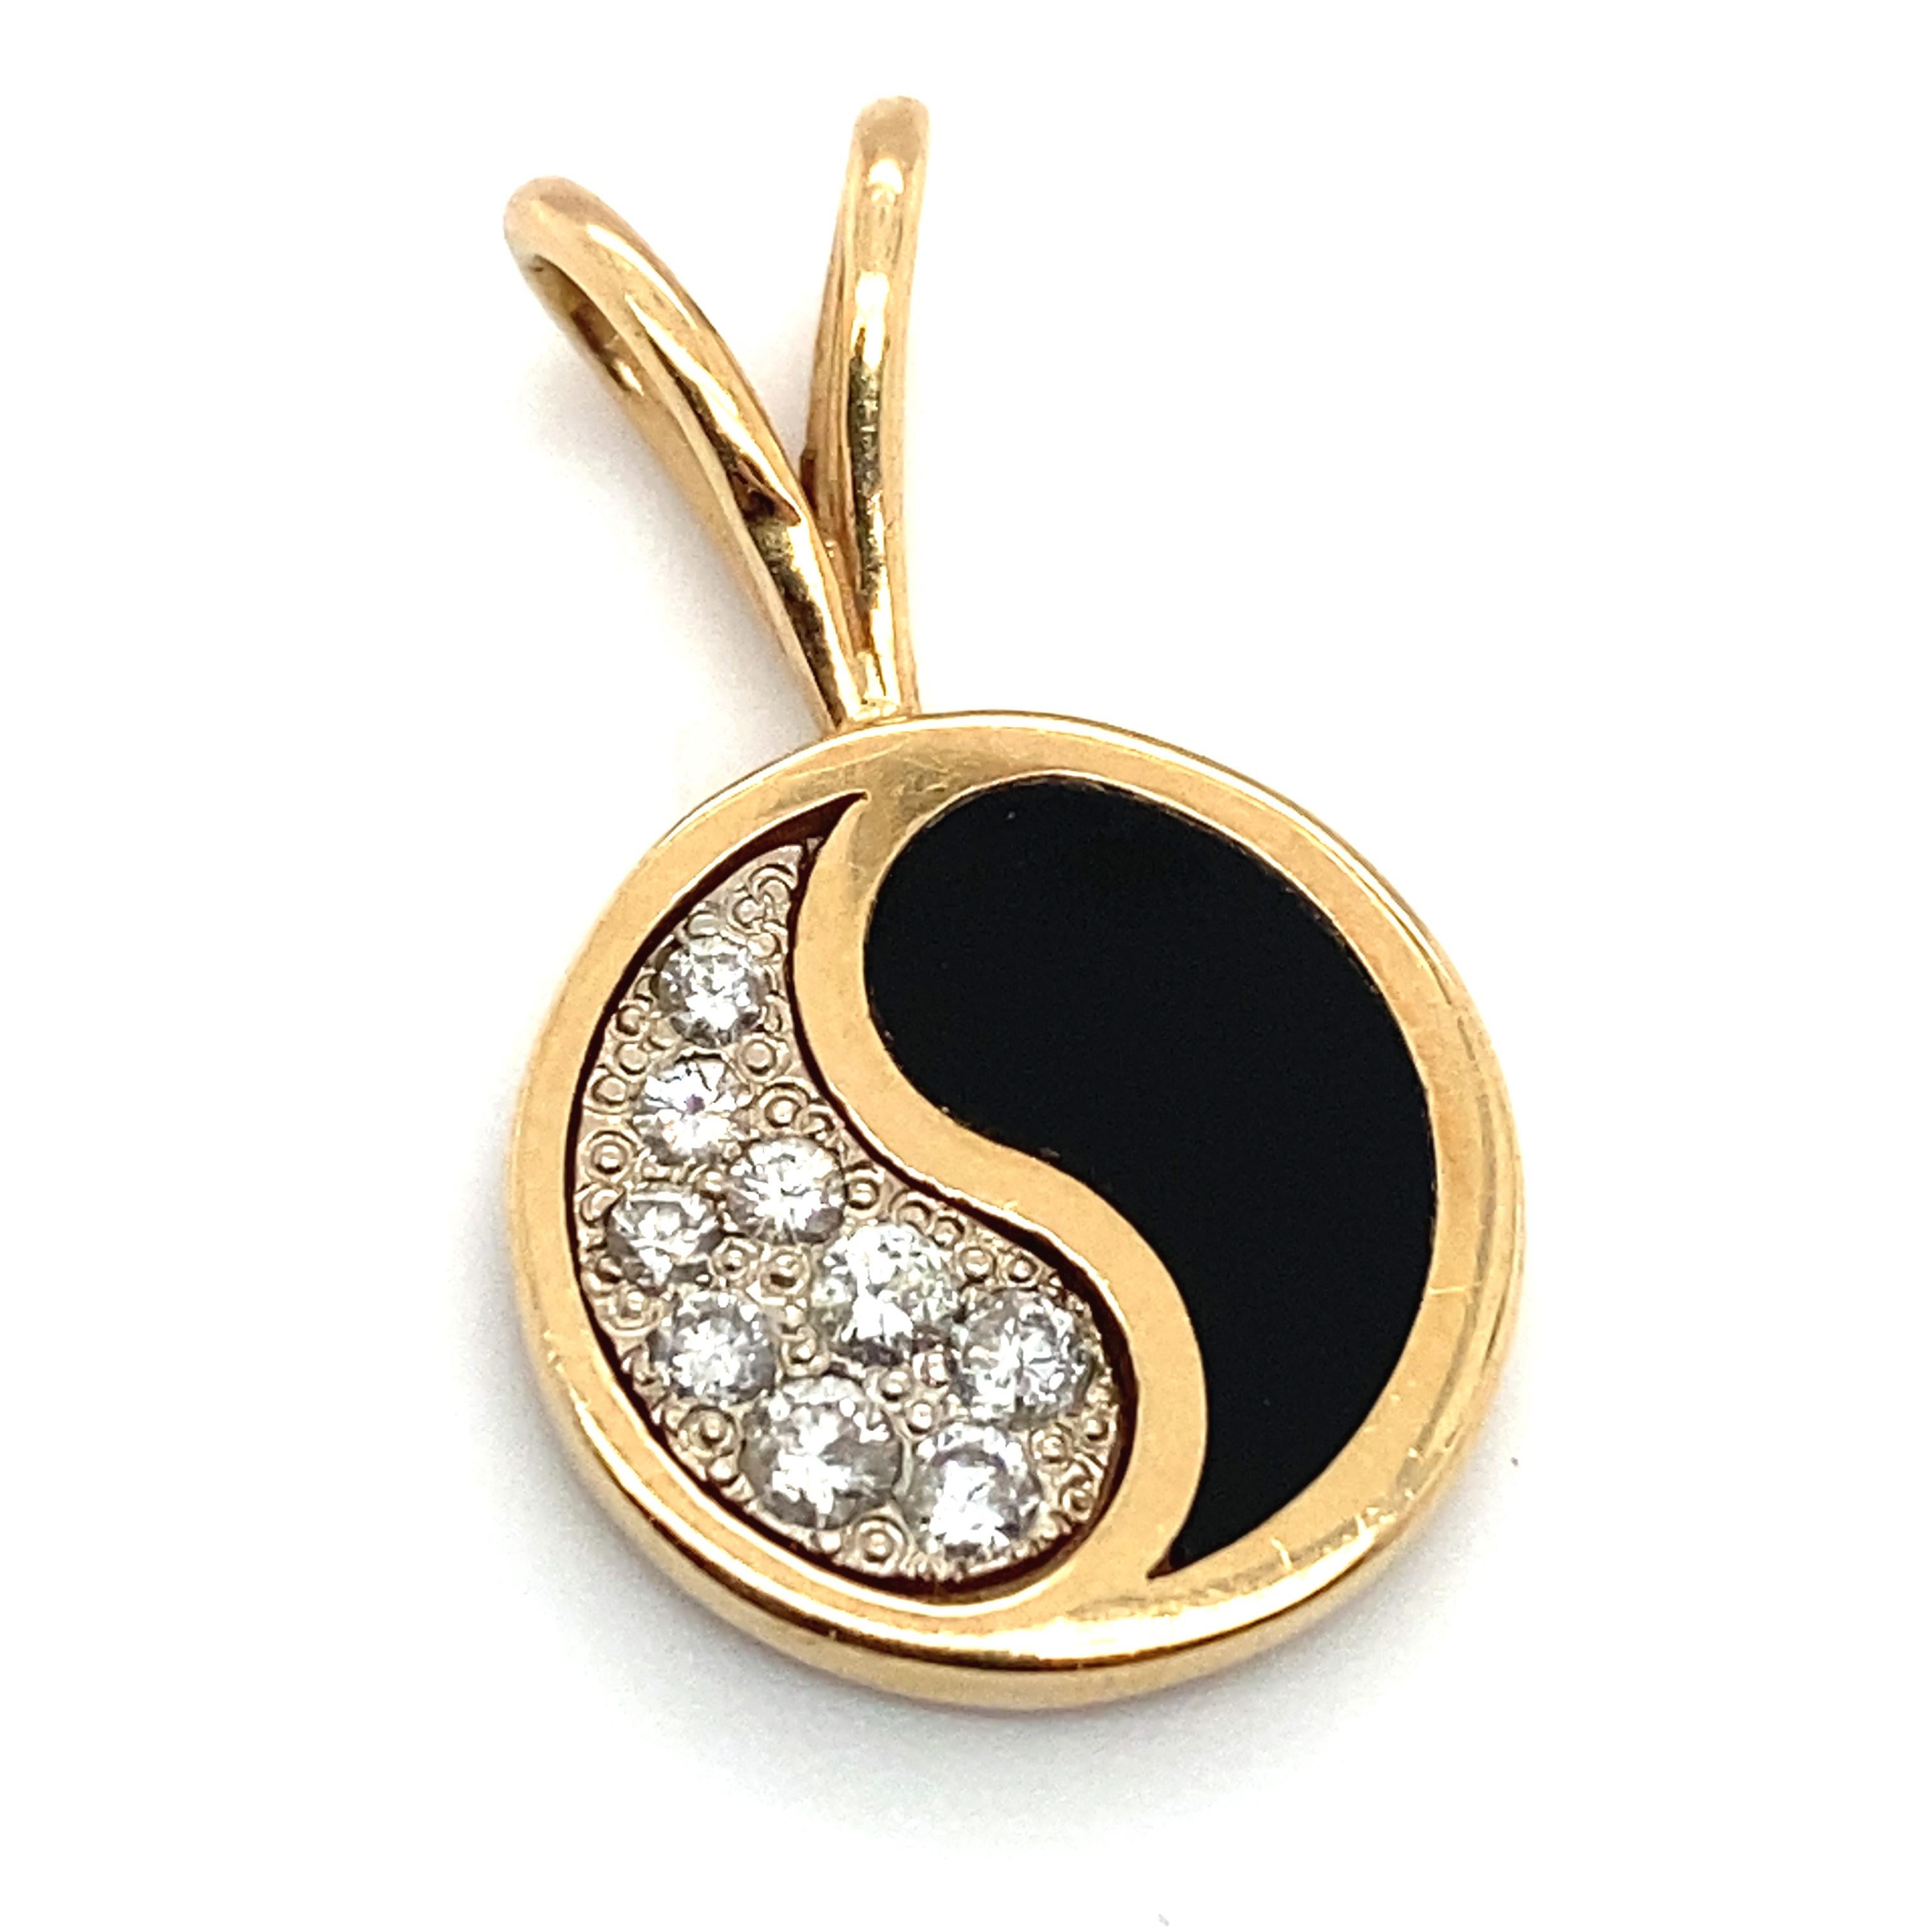 Item Details: This unique yin-yang pendant features black coral and diamond accents and is made in Hawaii.

Circa: 2000s
Metal Type: 14 Karat Yellow Gold
Weight: 4 grams
Size: 1 inch Length 

Diamond Details:

Carat: 0.25 carat total weight
Shape: